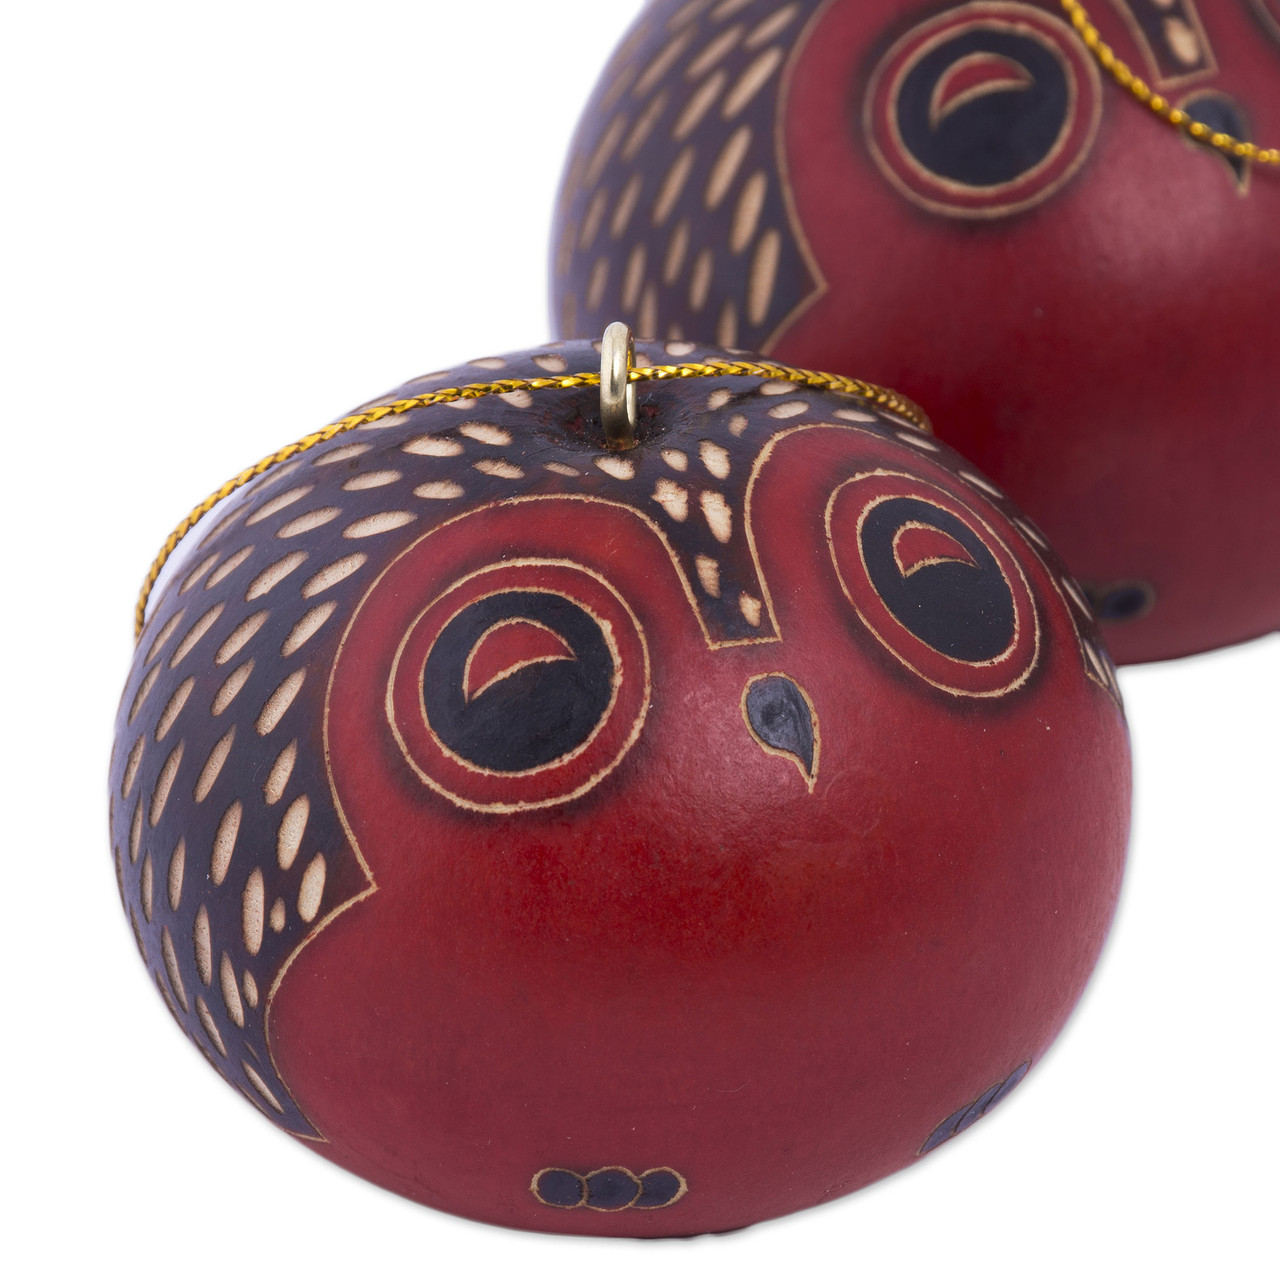 Set of 4 Dried Gourd Peacock Ornaments from Peru - Andean Peacocks